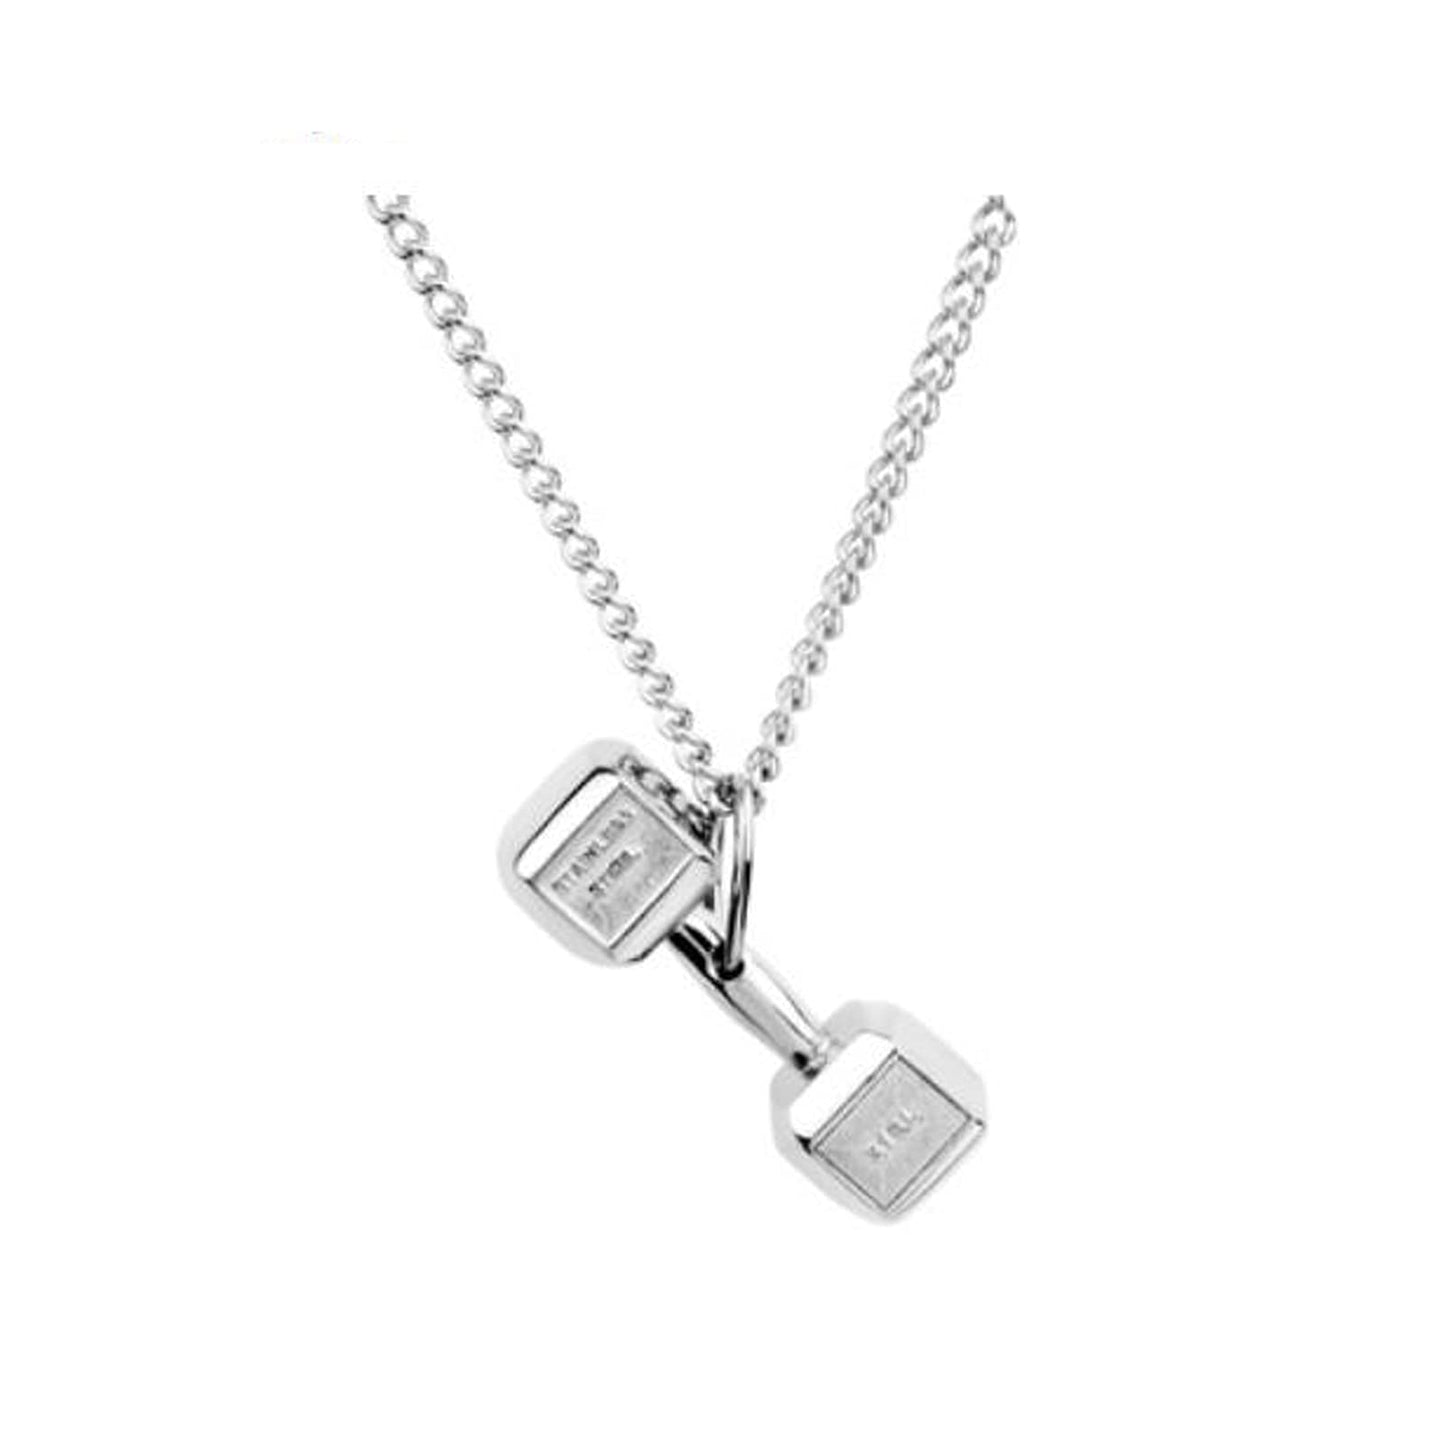 WATSKY trendy necklaces 1Pc Pendant Necklaces，Necklace For Men's Dumbbell Stainless Steel Barbell Pendant Gold Fashion Fitness Chain Necklace Gifts For Men's Accessories (Color : Silver)